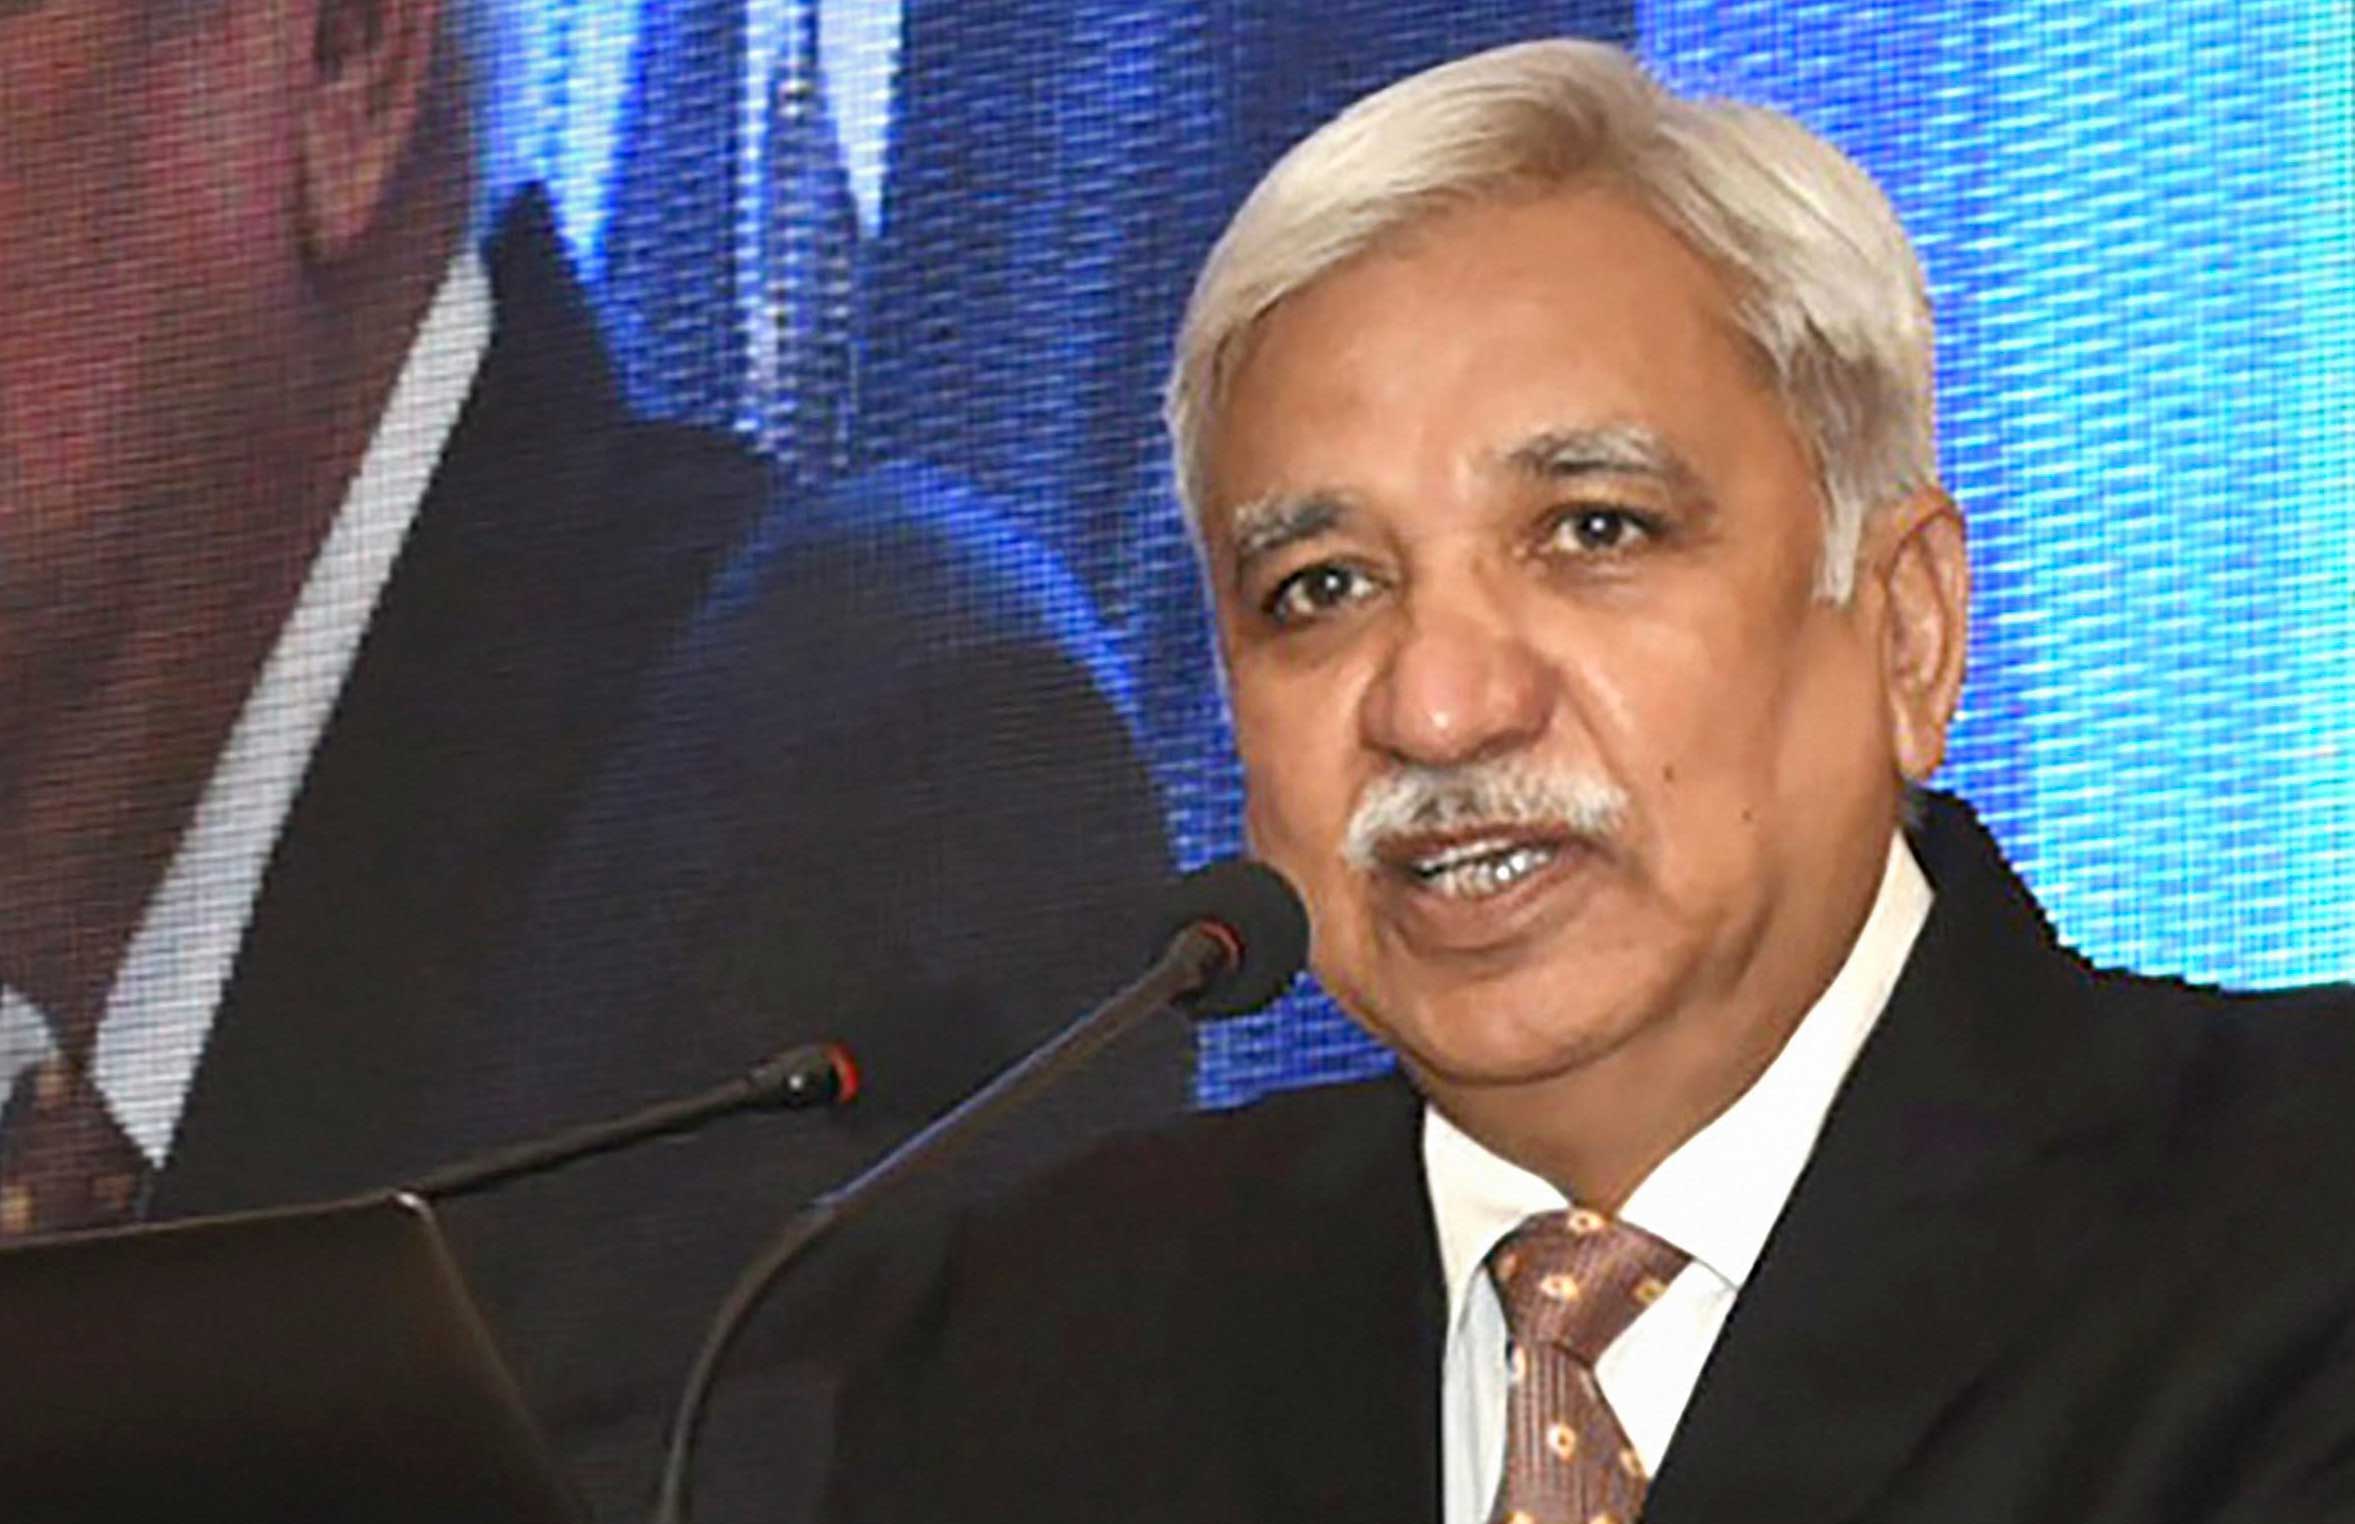 Chief Election Commissioner Sunil Arora has described the controversy over the exclusion of minority views as 'unsavoury'